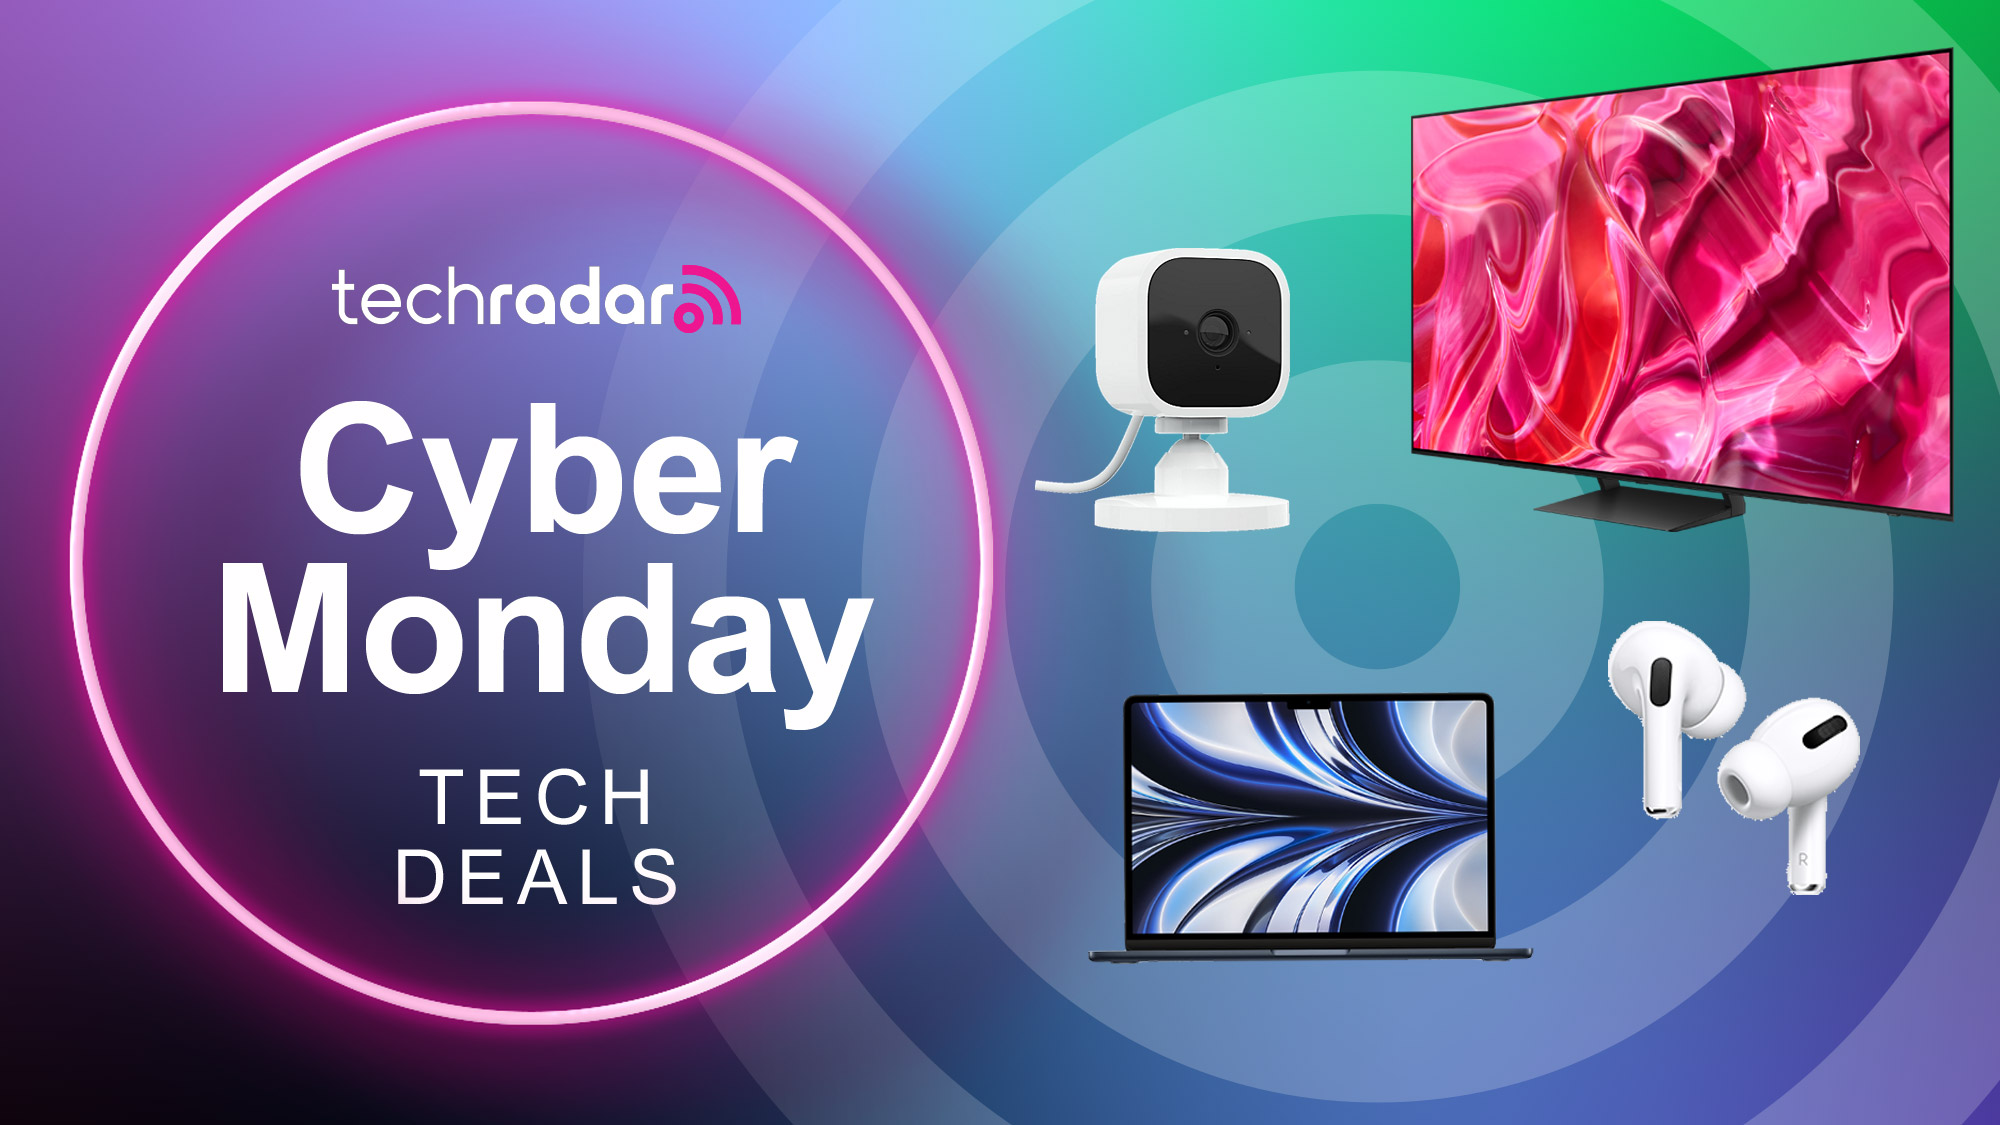 7 fantastic Cyber Monday 4K Blu-ray deals we will be buying